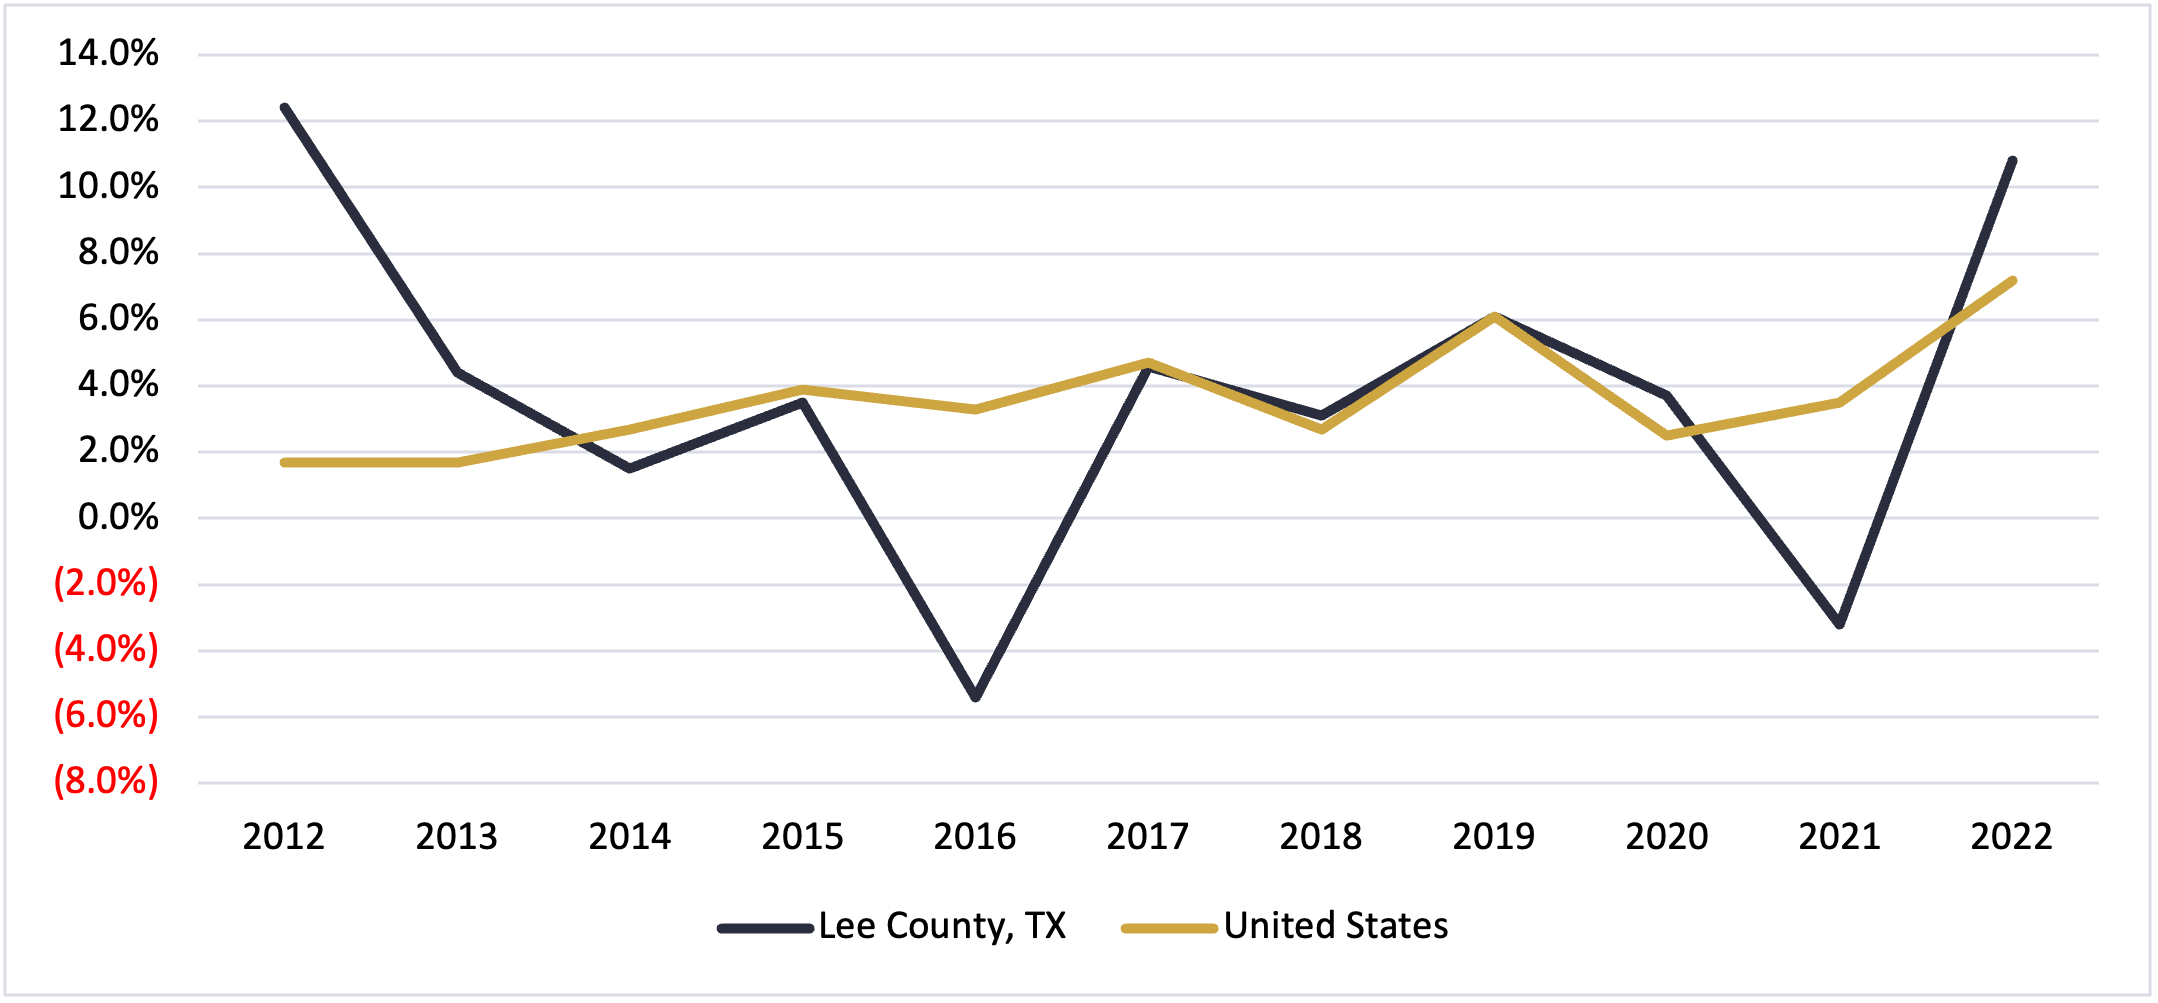 Lee County Texas Median Household Income 2022